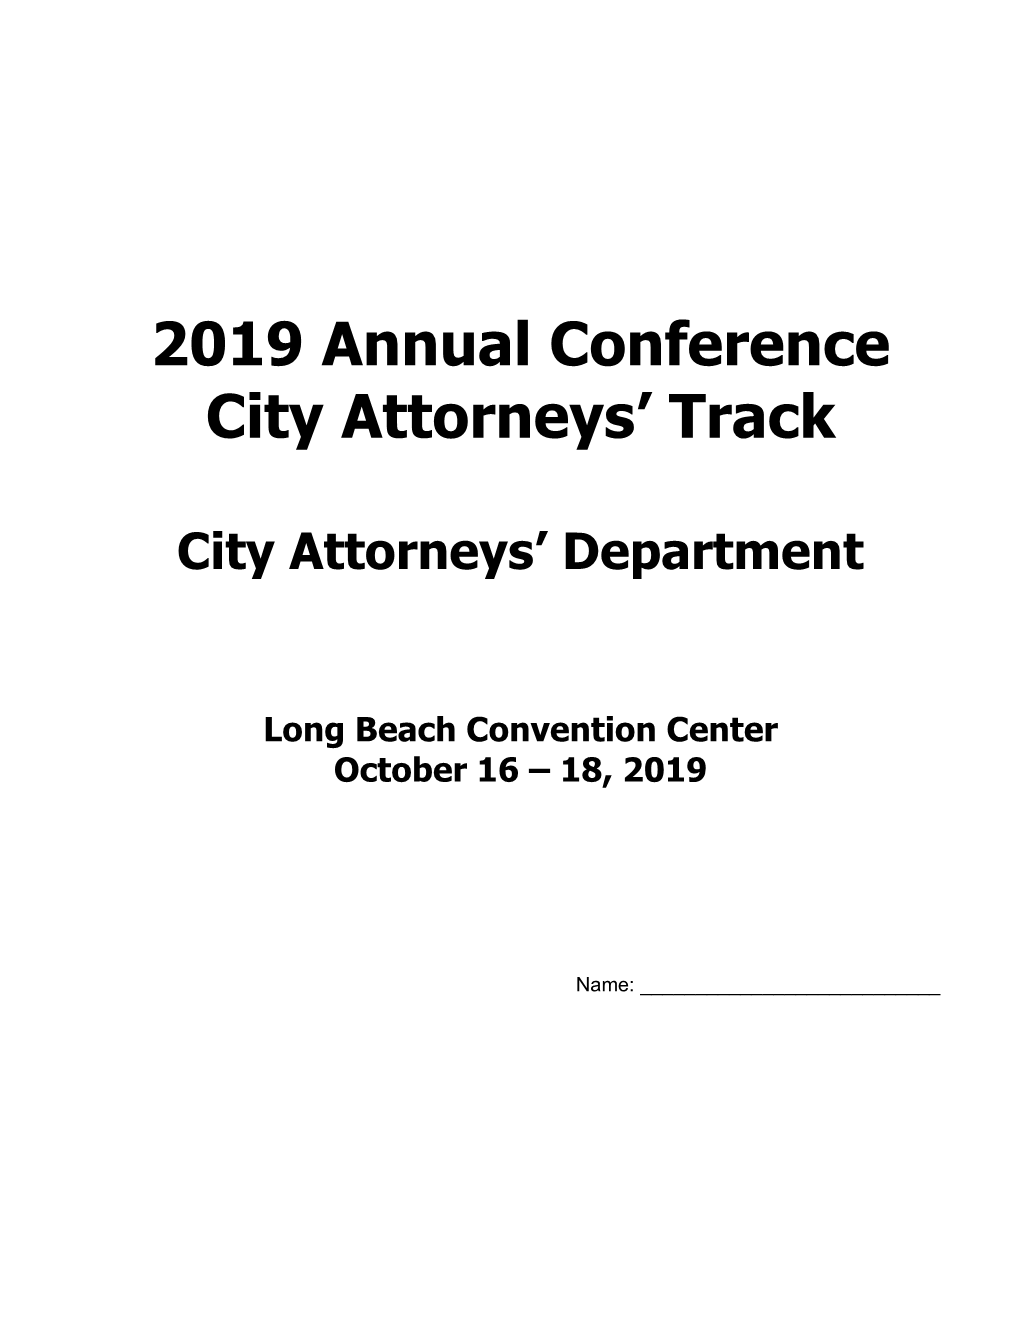 2019 Annual Conference City Attorneys' Track